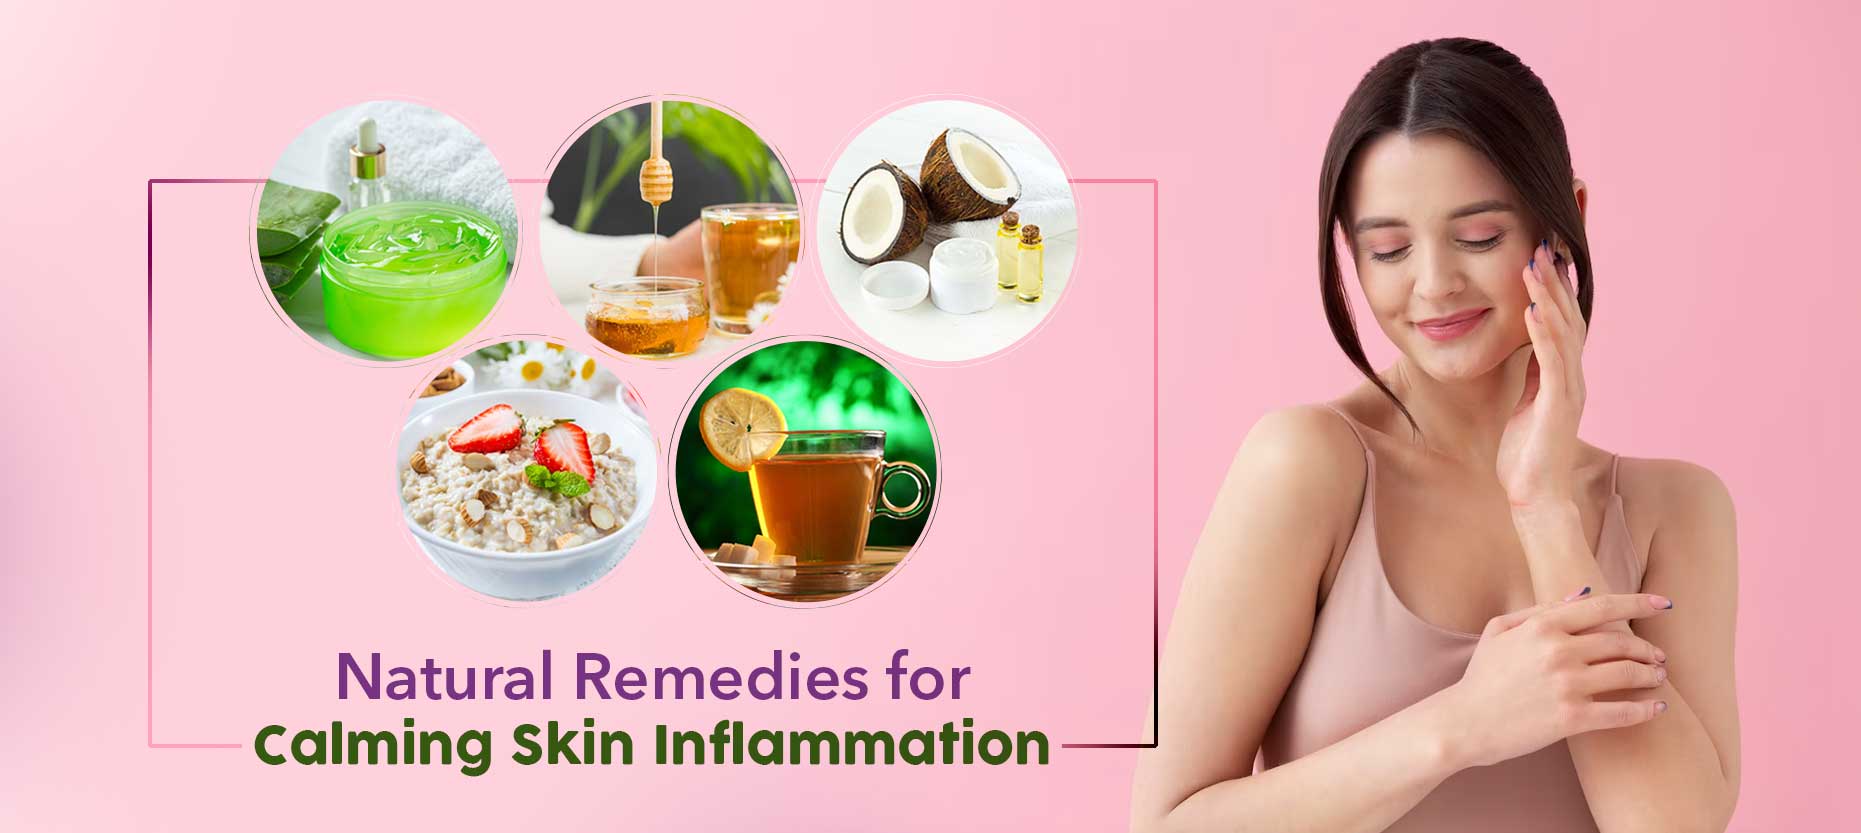 Natural Remedies for Calming Skin Inflammation